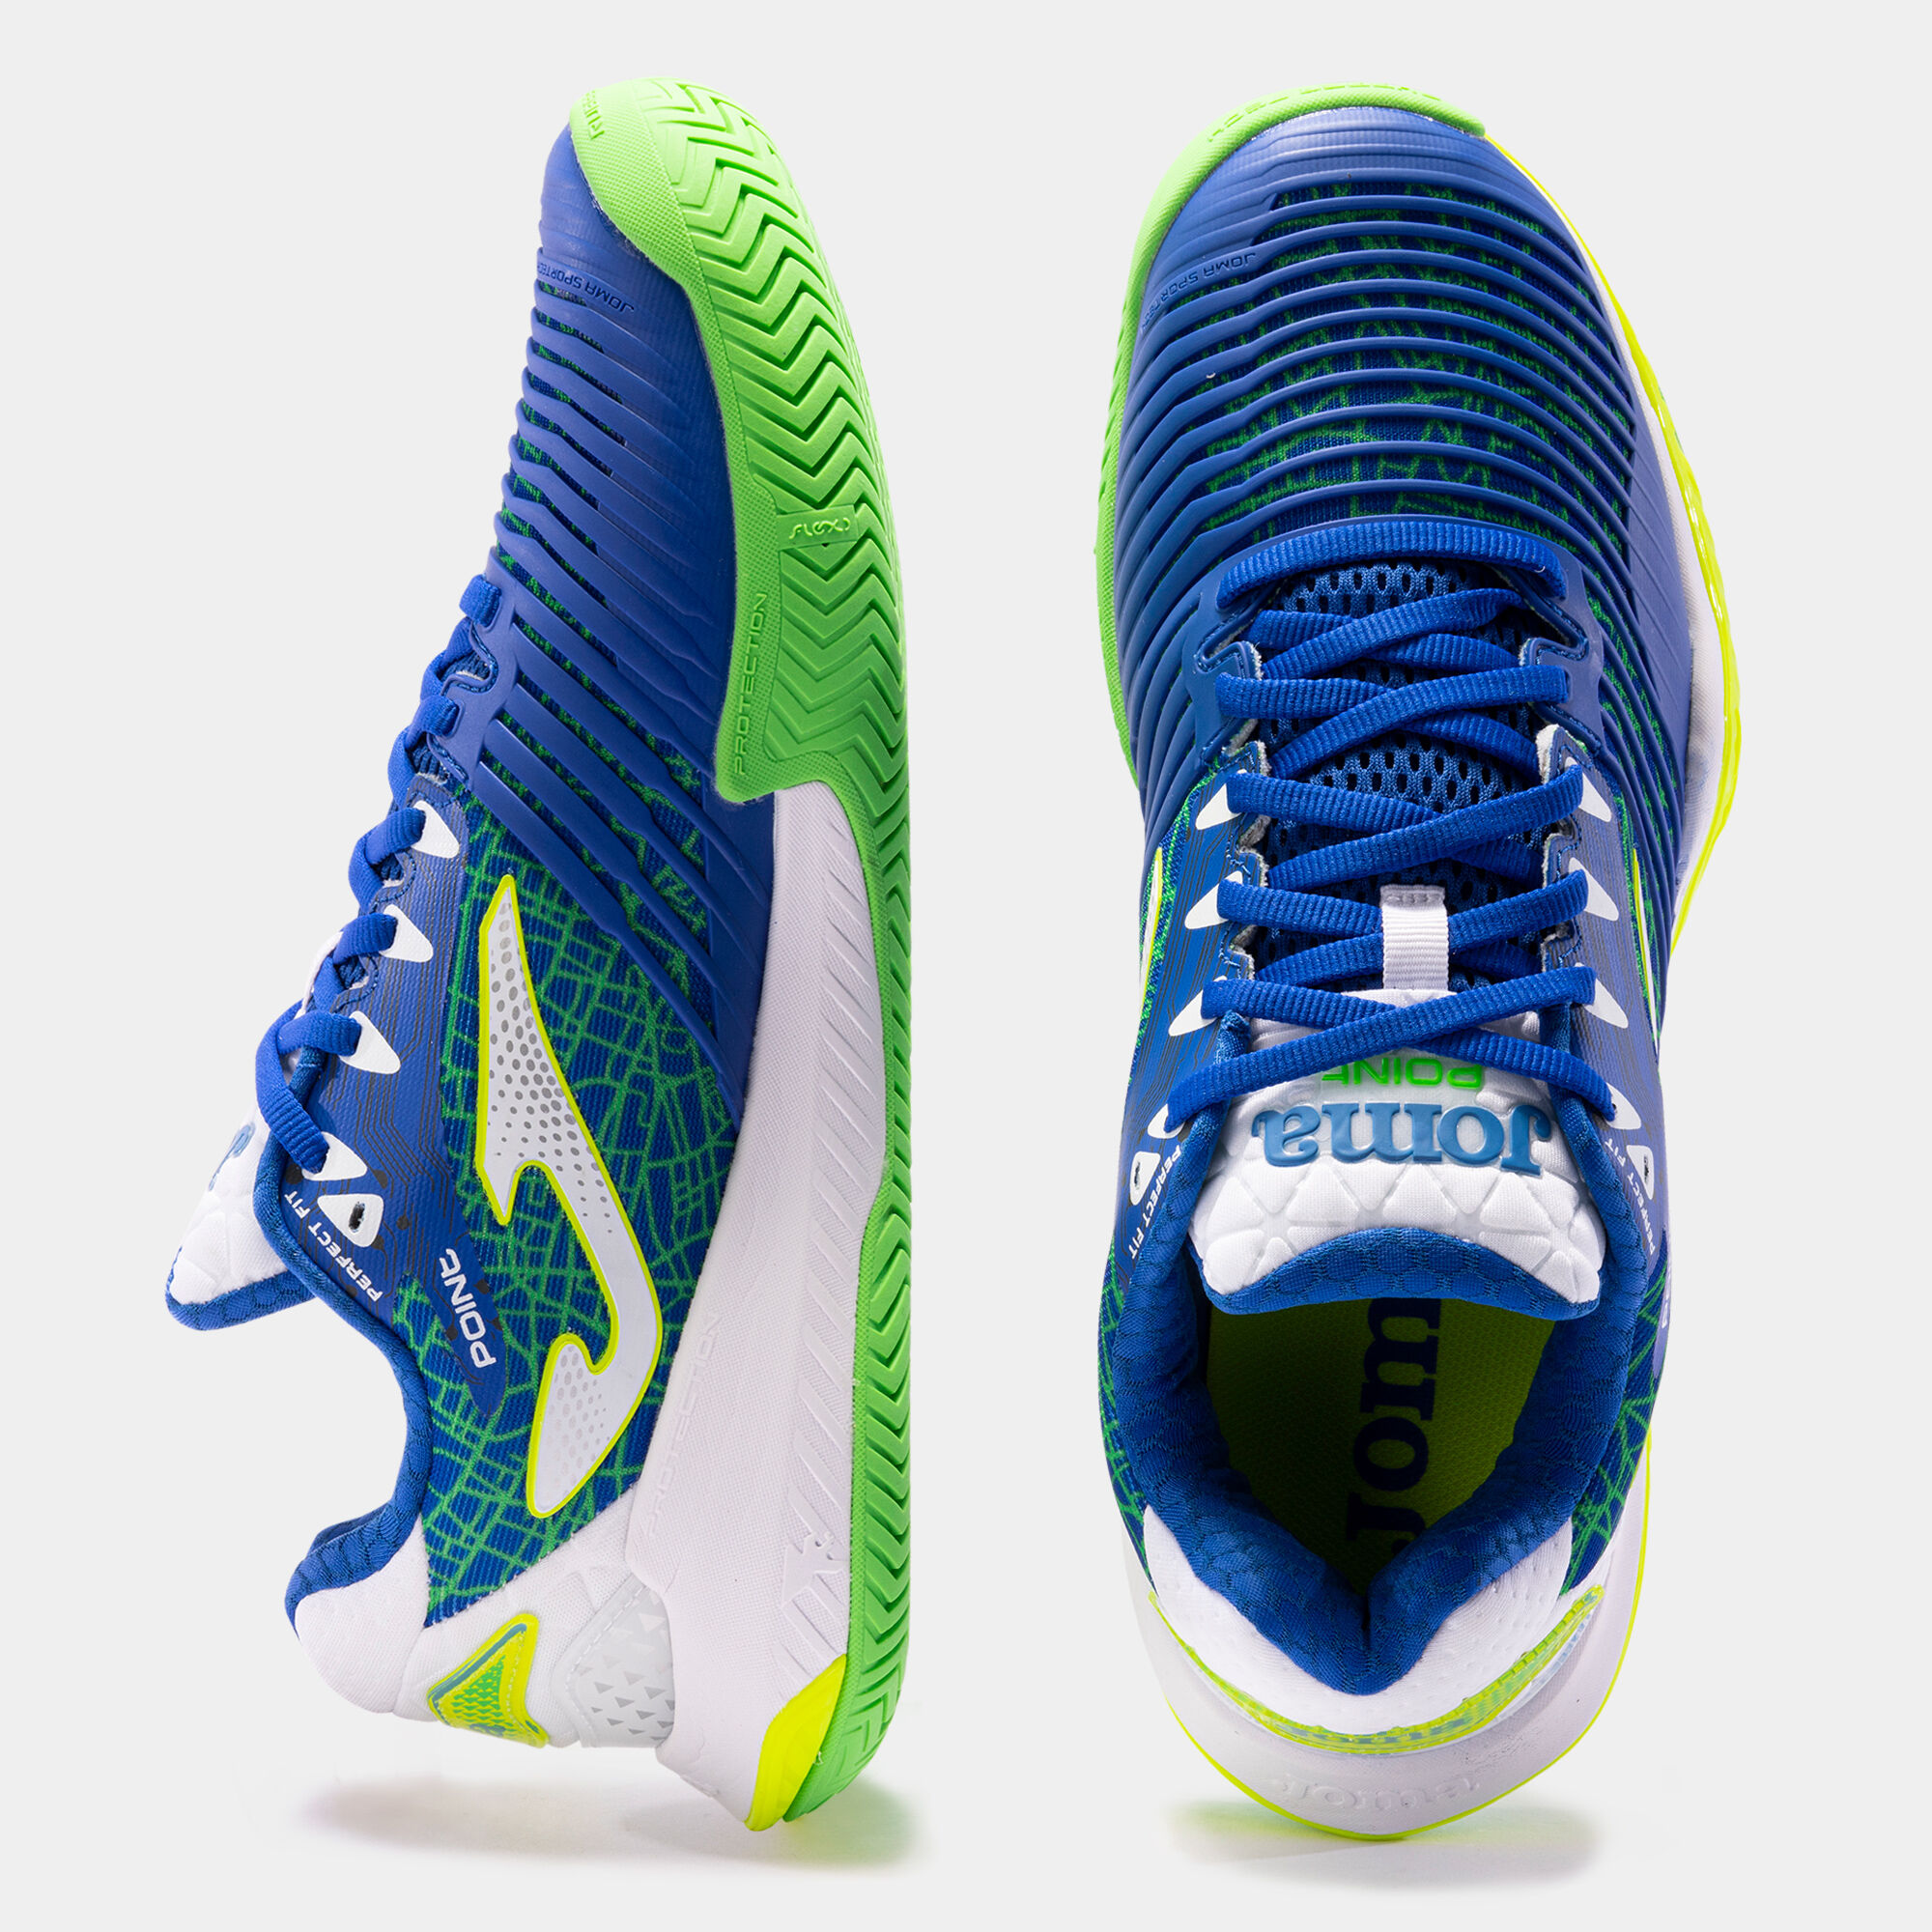 Shoes Point 22 hard court unisex royal blue fluorescent yellow